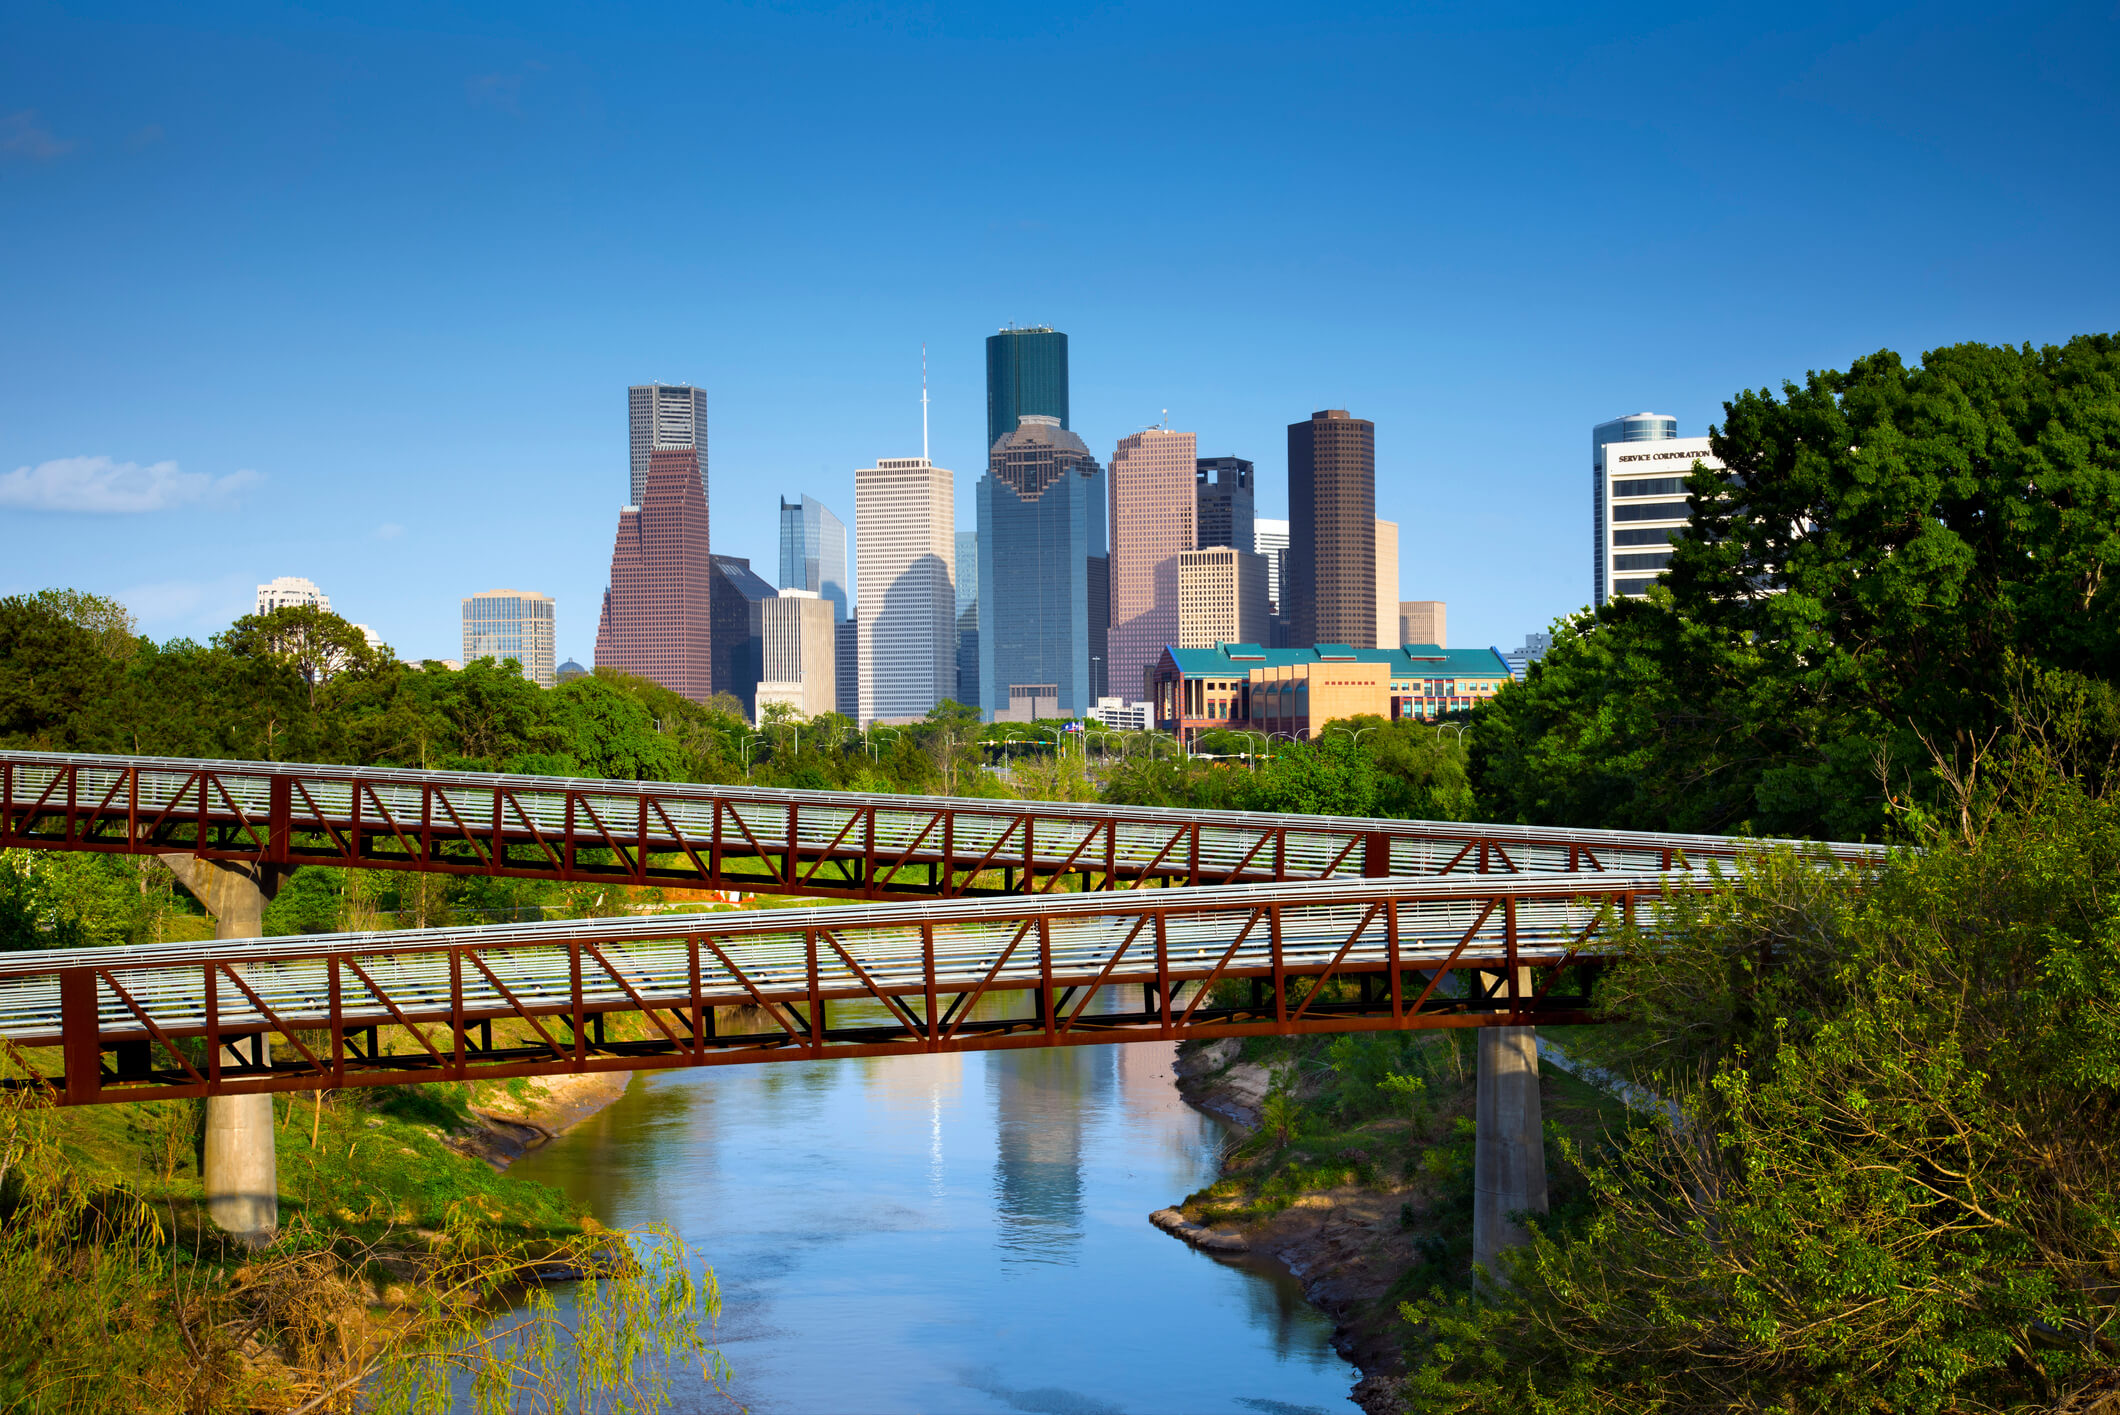 Urban Buffalo Bayou Park offers downtown Houston a green oasis for recreation. The Rosemont Pedestrian Bridges give pedestrians, bicyclists and joggers safe access across the Buffalo Bayou River and also beautiful views of the skyline.